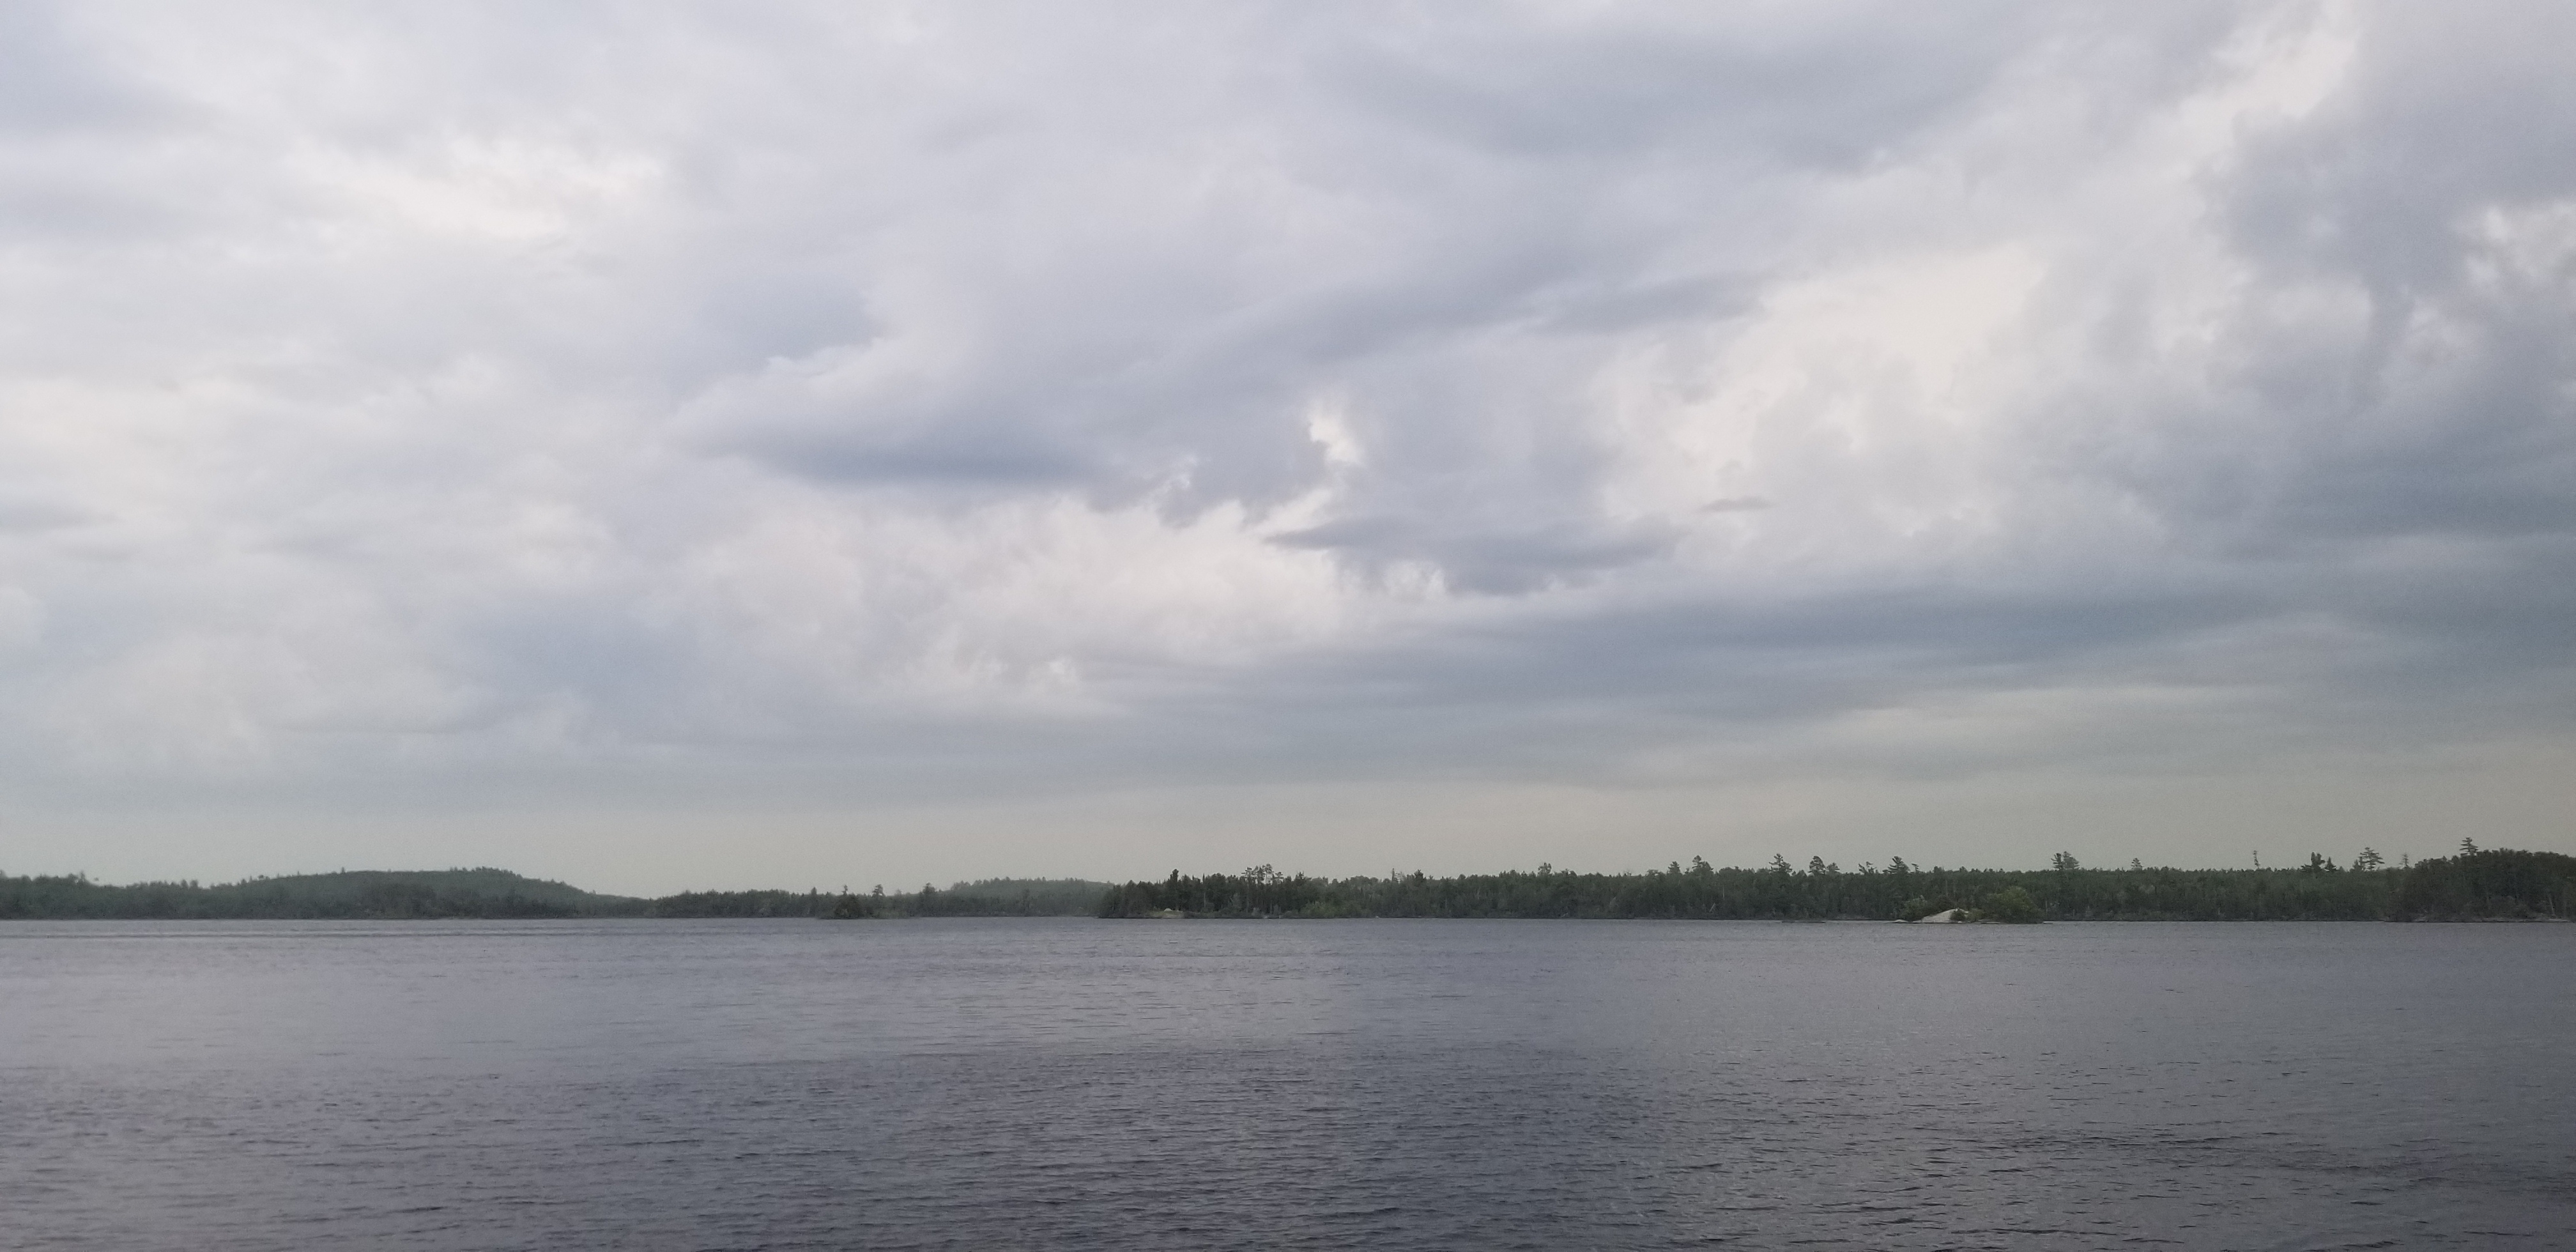 storm clouds in the distance